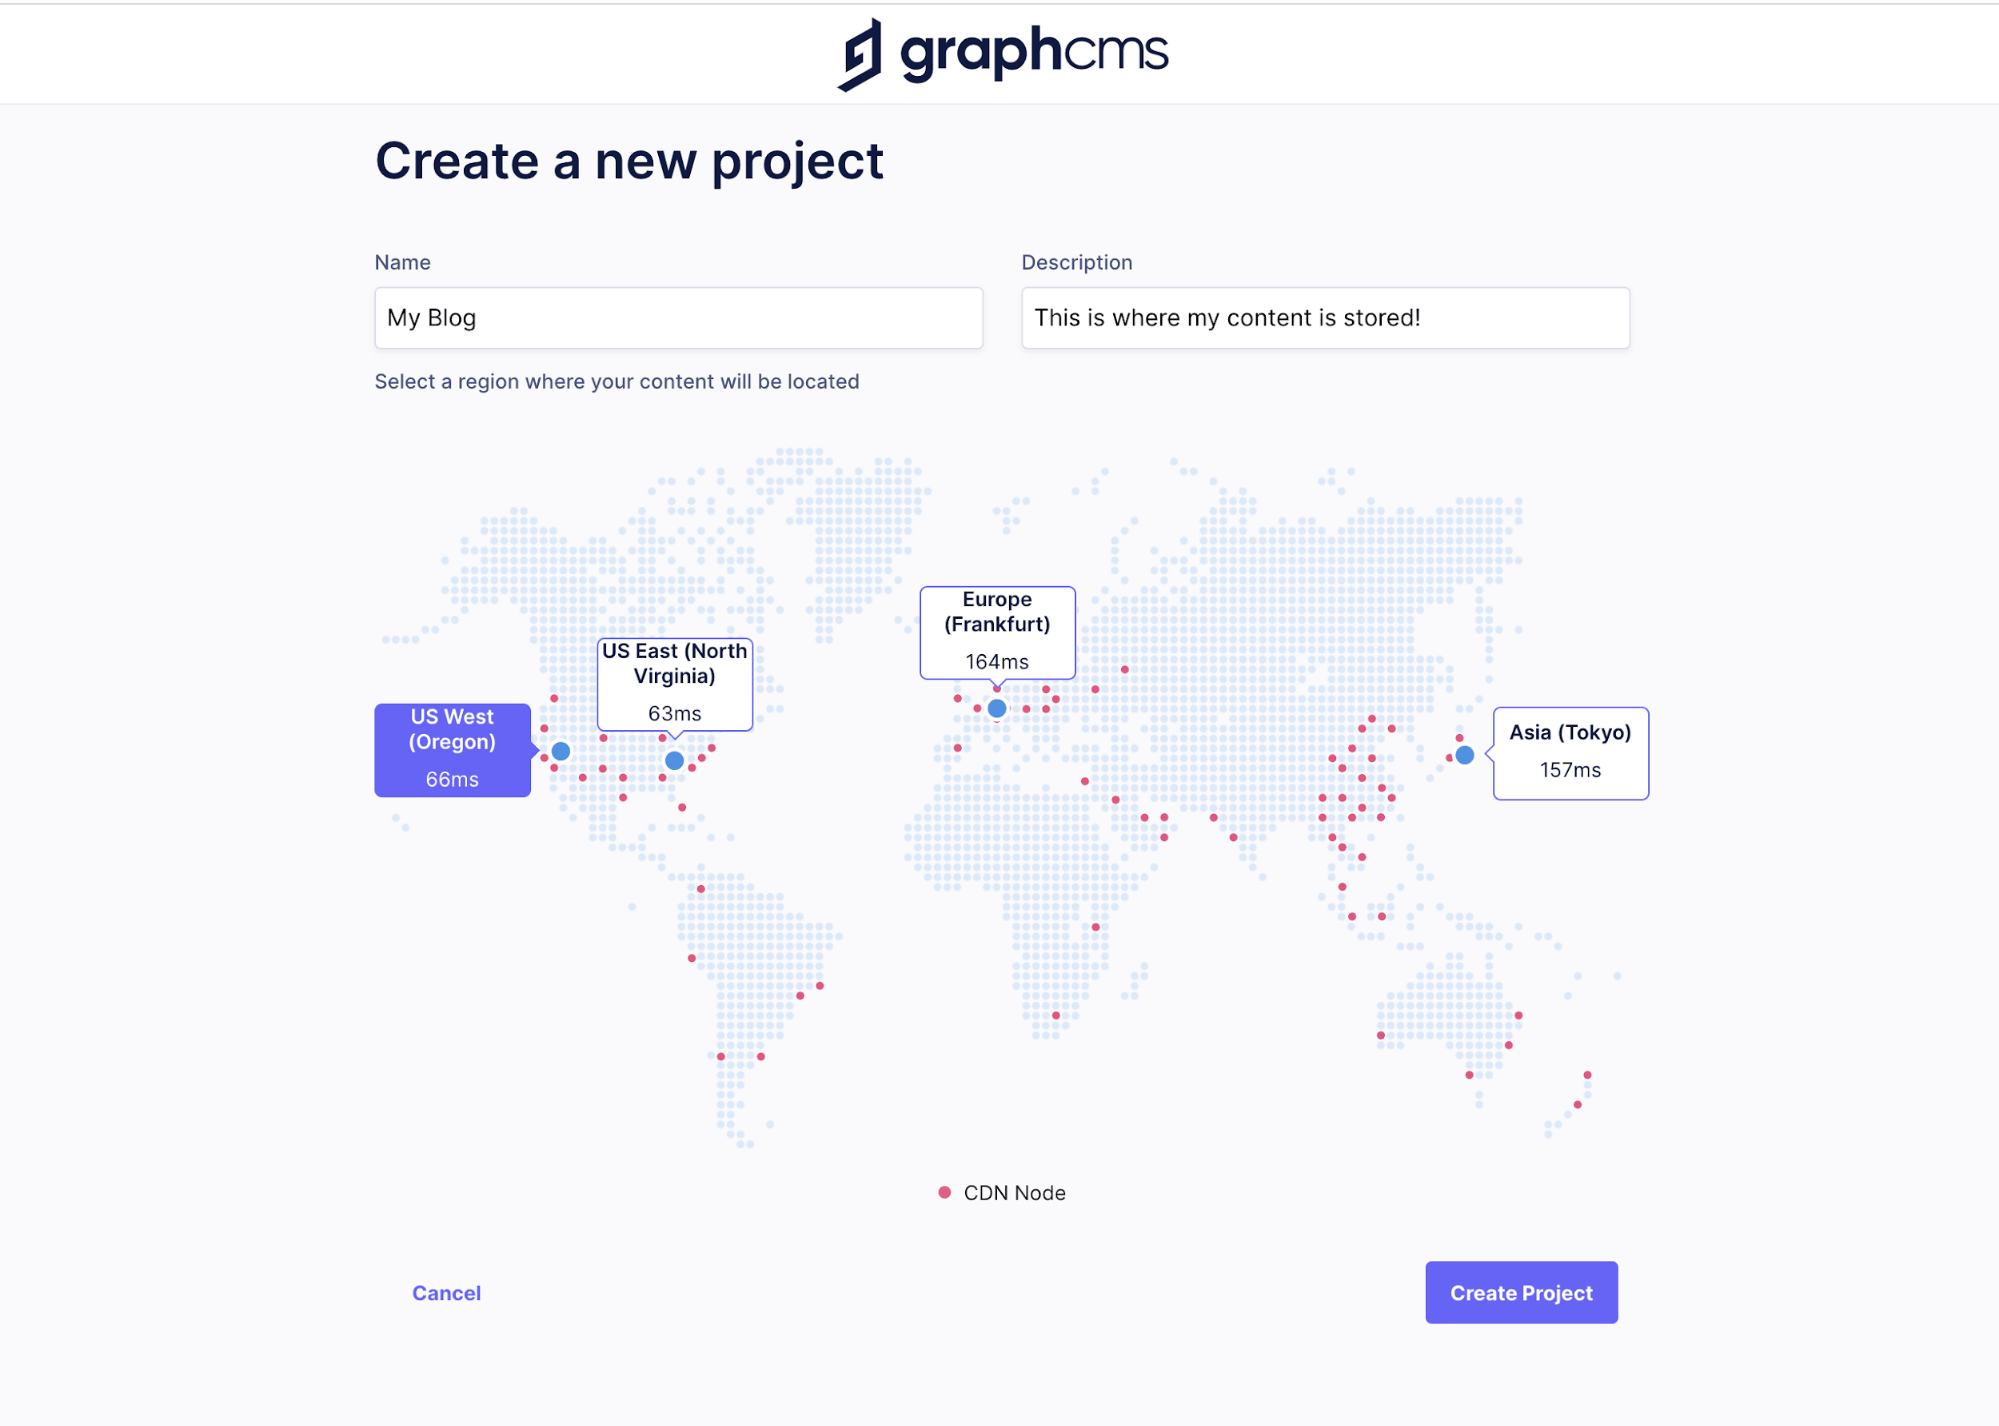 Fill out the name and description text fields to name your new project and select your CDN region.